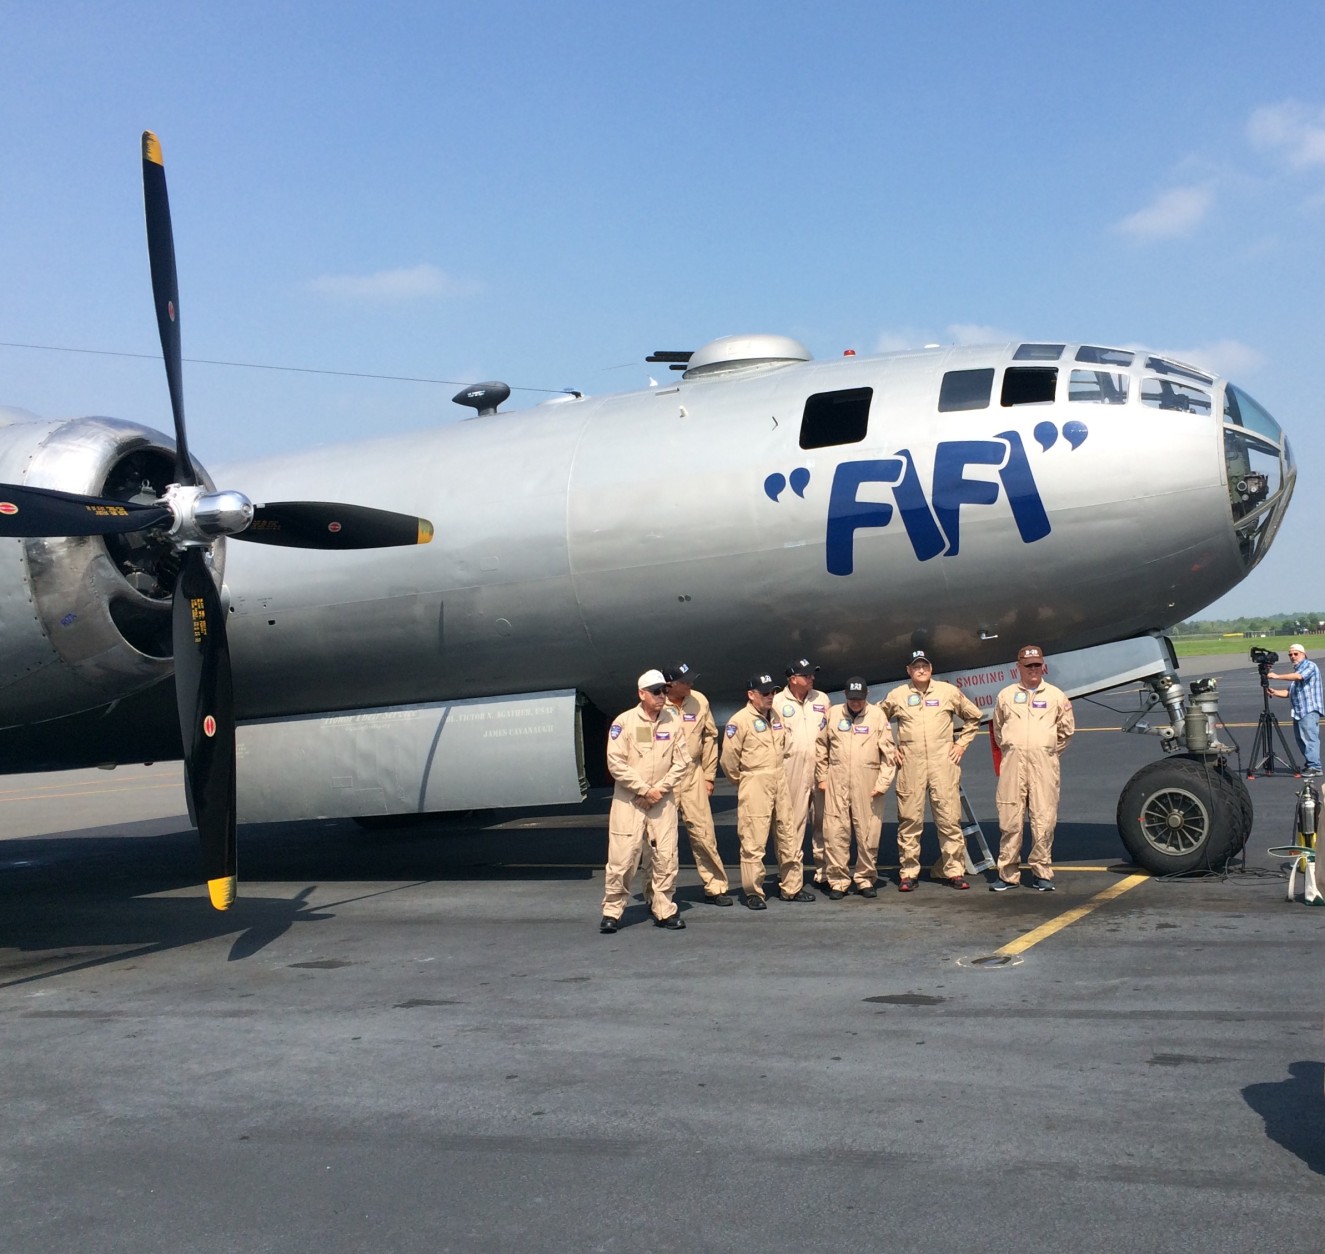 The Commemorative Air Force crew stands by "FIFI" the B-29 Super Fortress.  (WTOP/Mike Murillo)